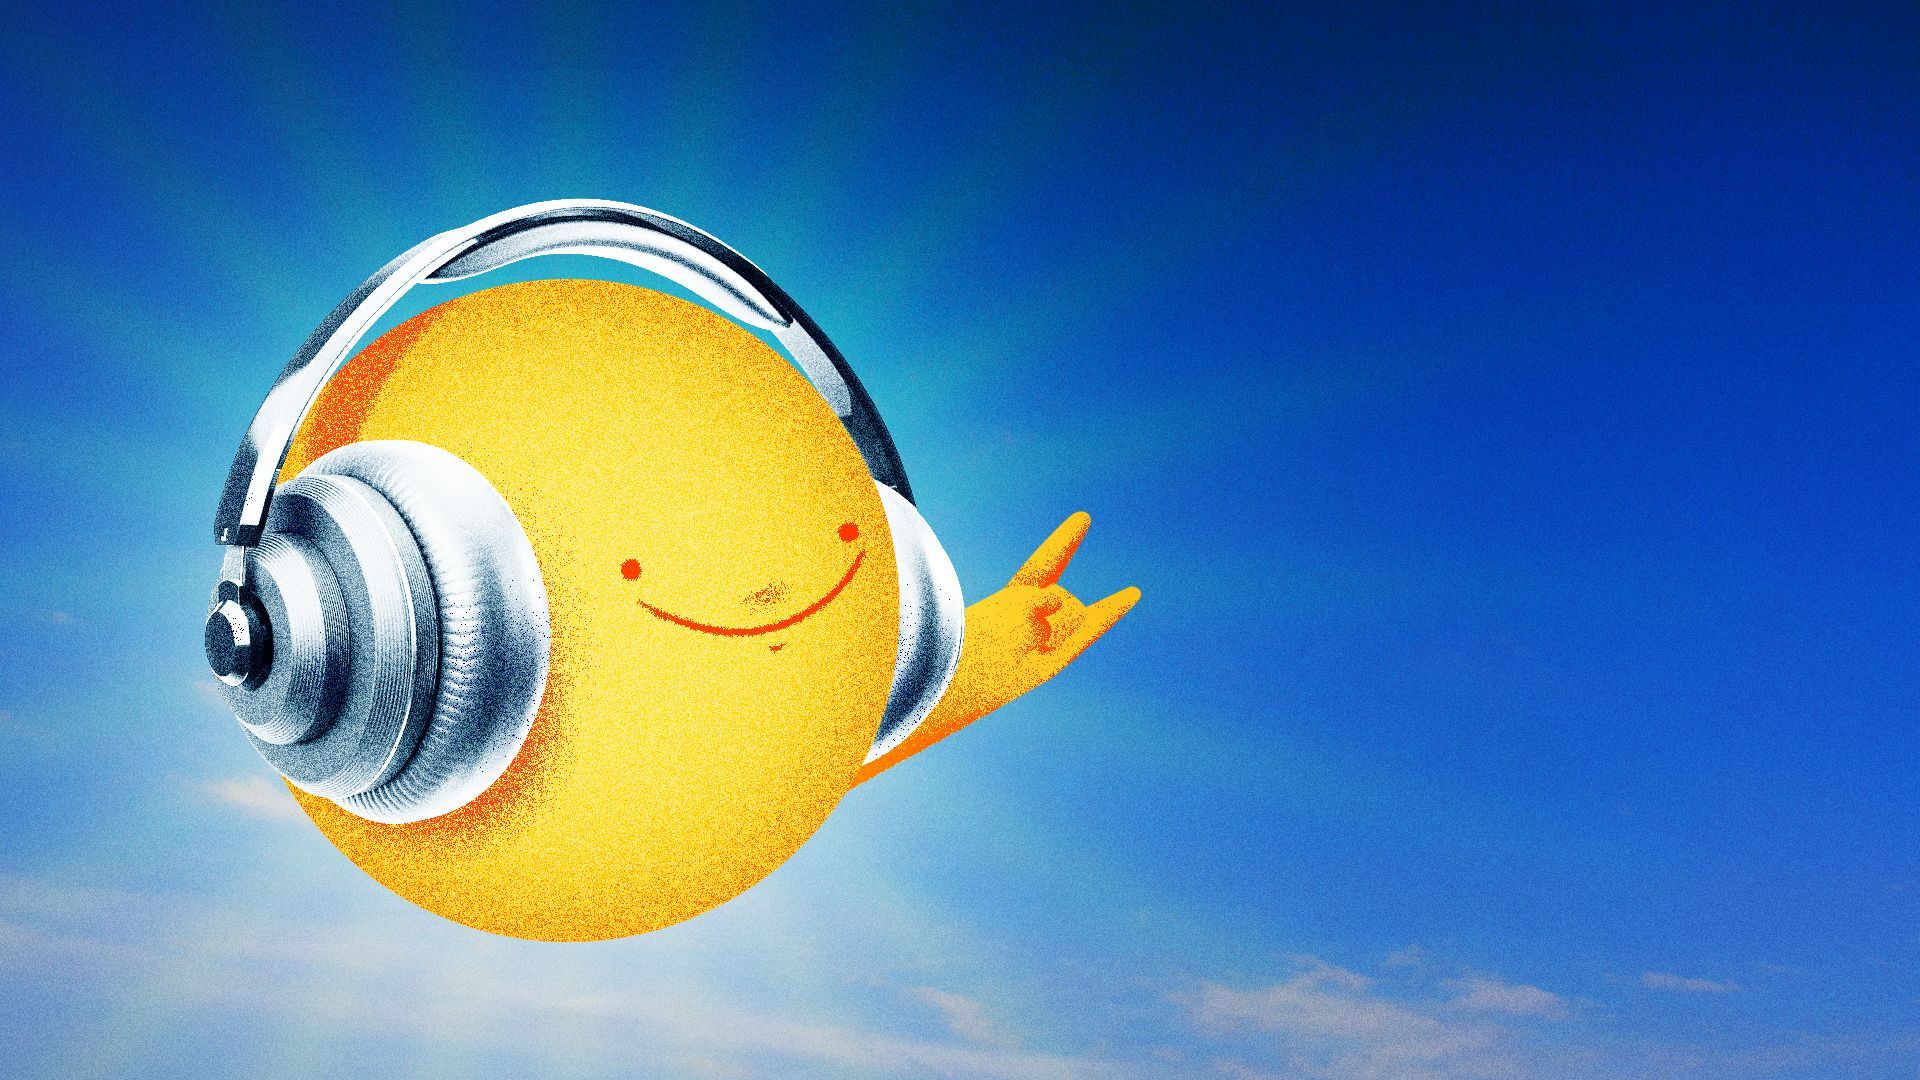 Illustration of a sun listening to headphones and smiling. 